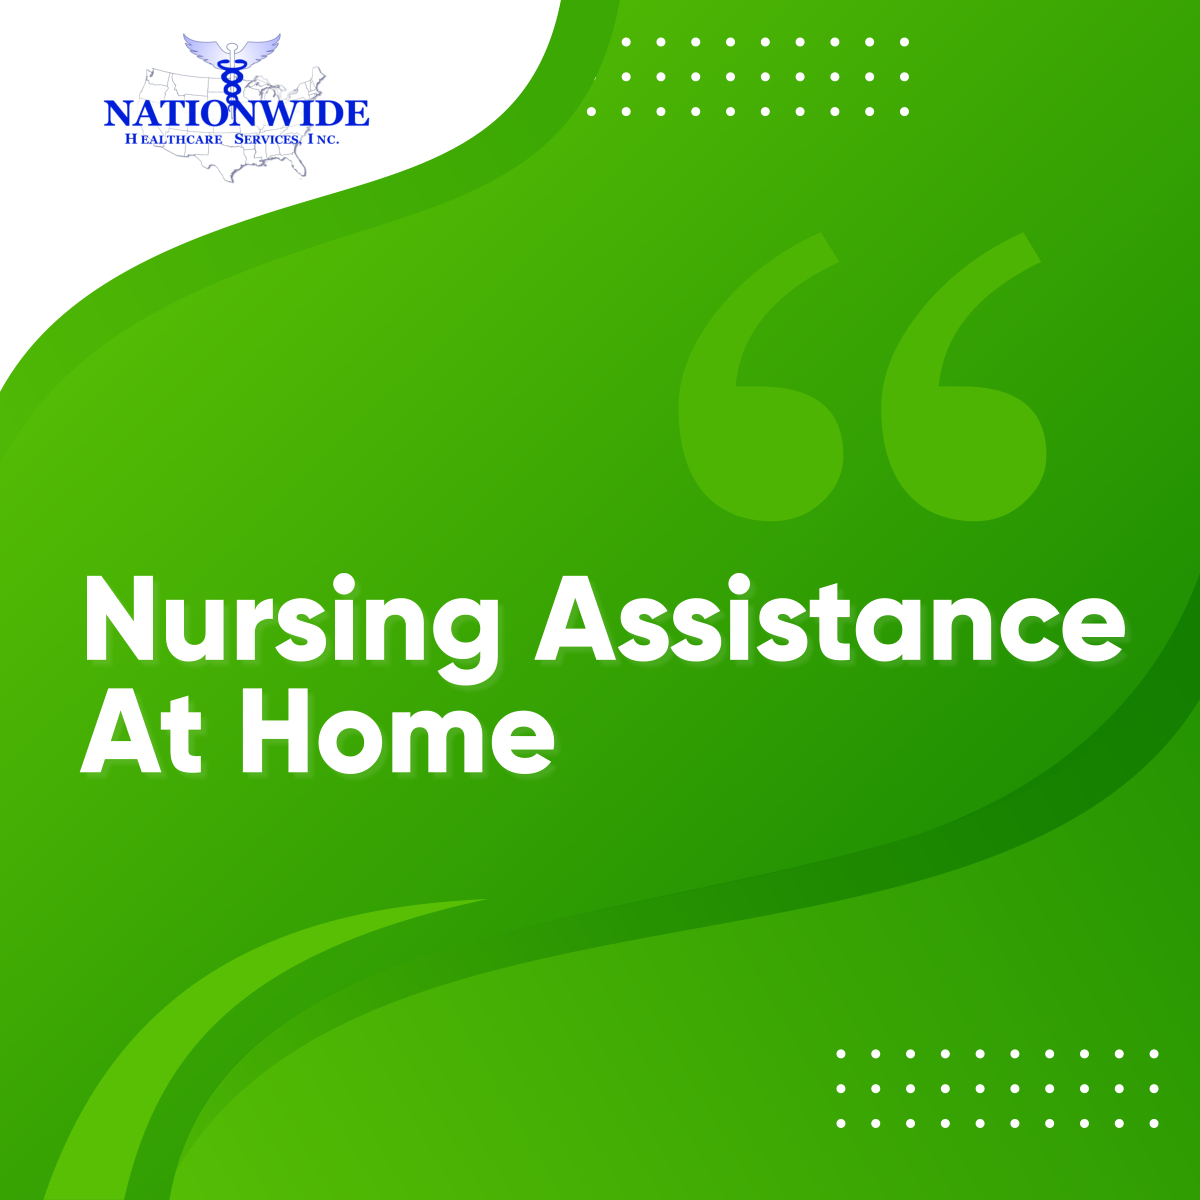 When you're recovering from your surgery or injury or dealing with chronic conditions, nursing care is important for you to keep your health in check. We provide nursing services, such as wound care, medication management, diabetes management, and more.

#NursingAssistance